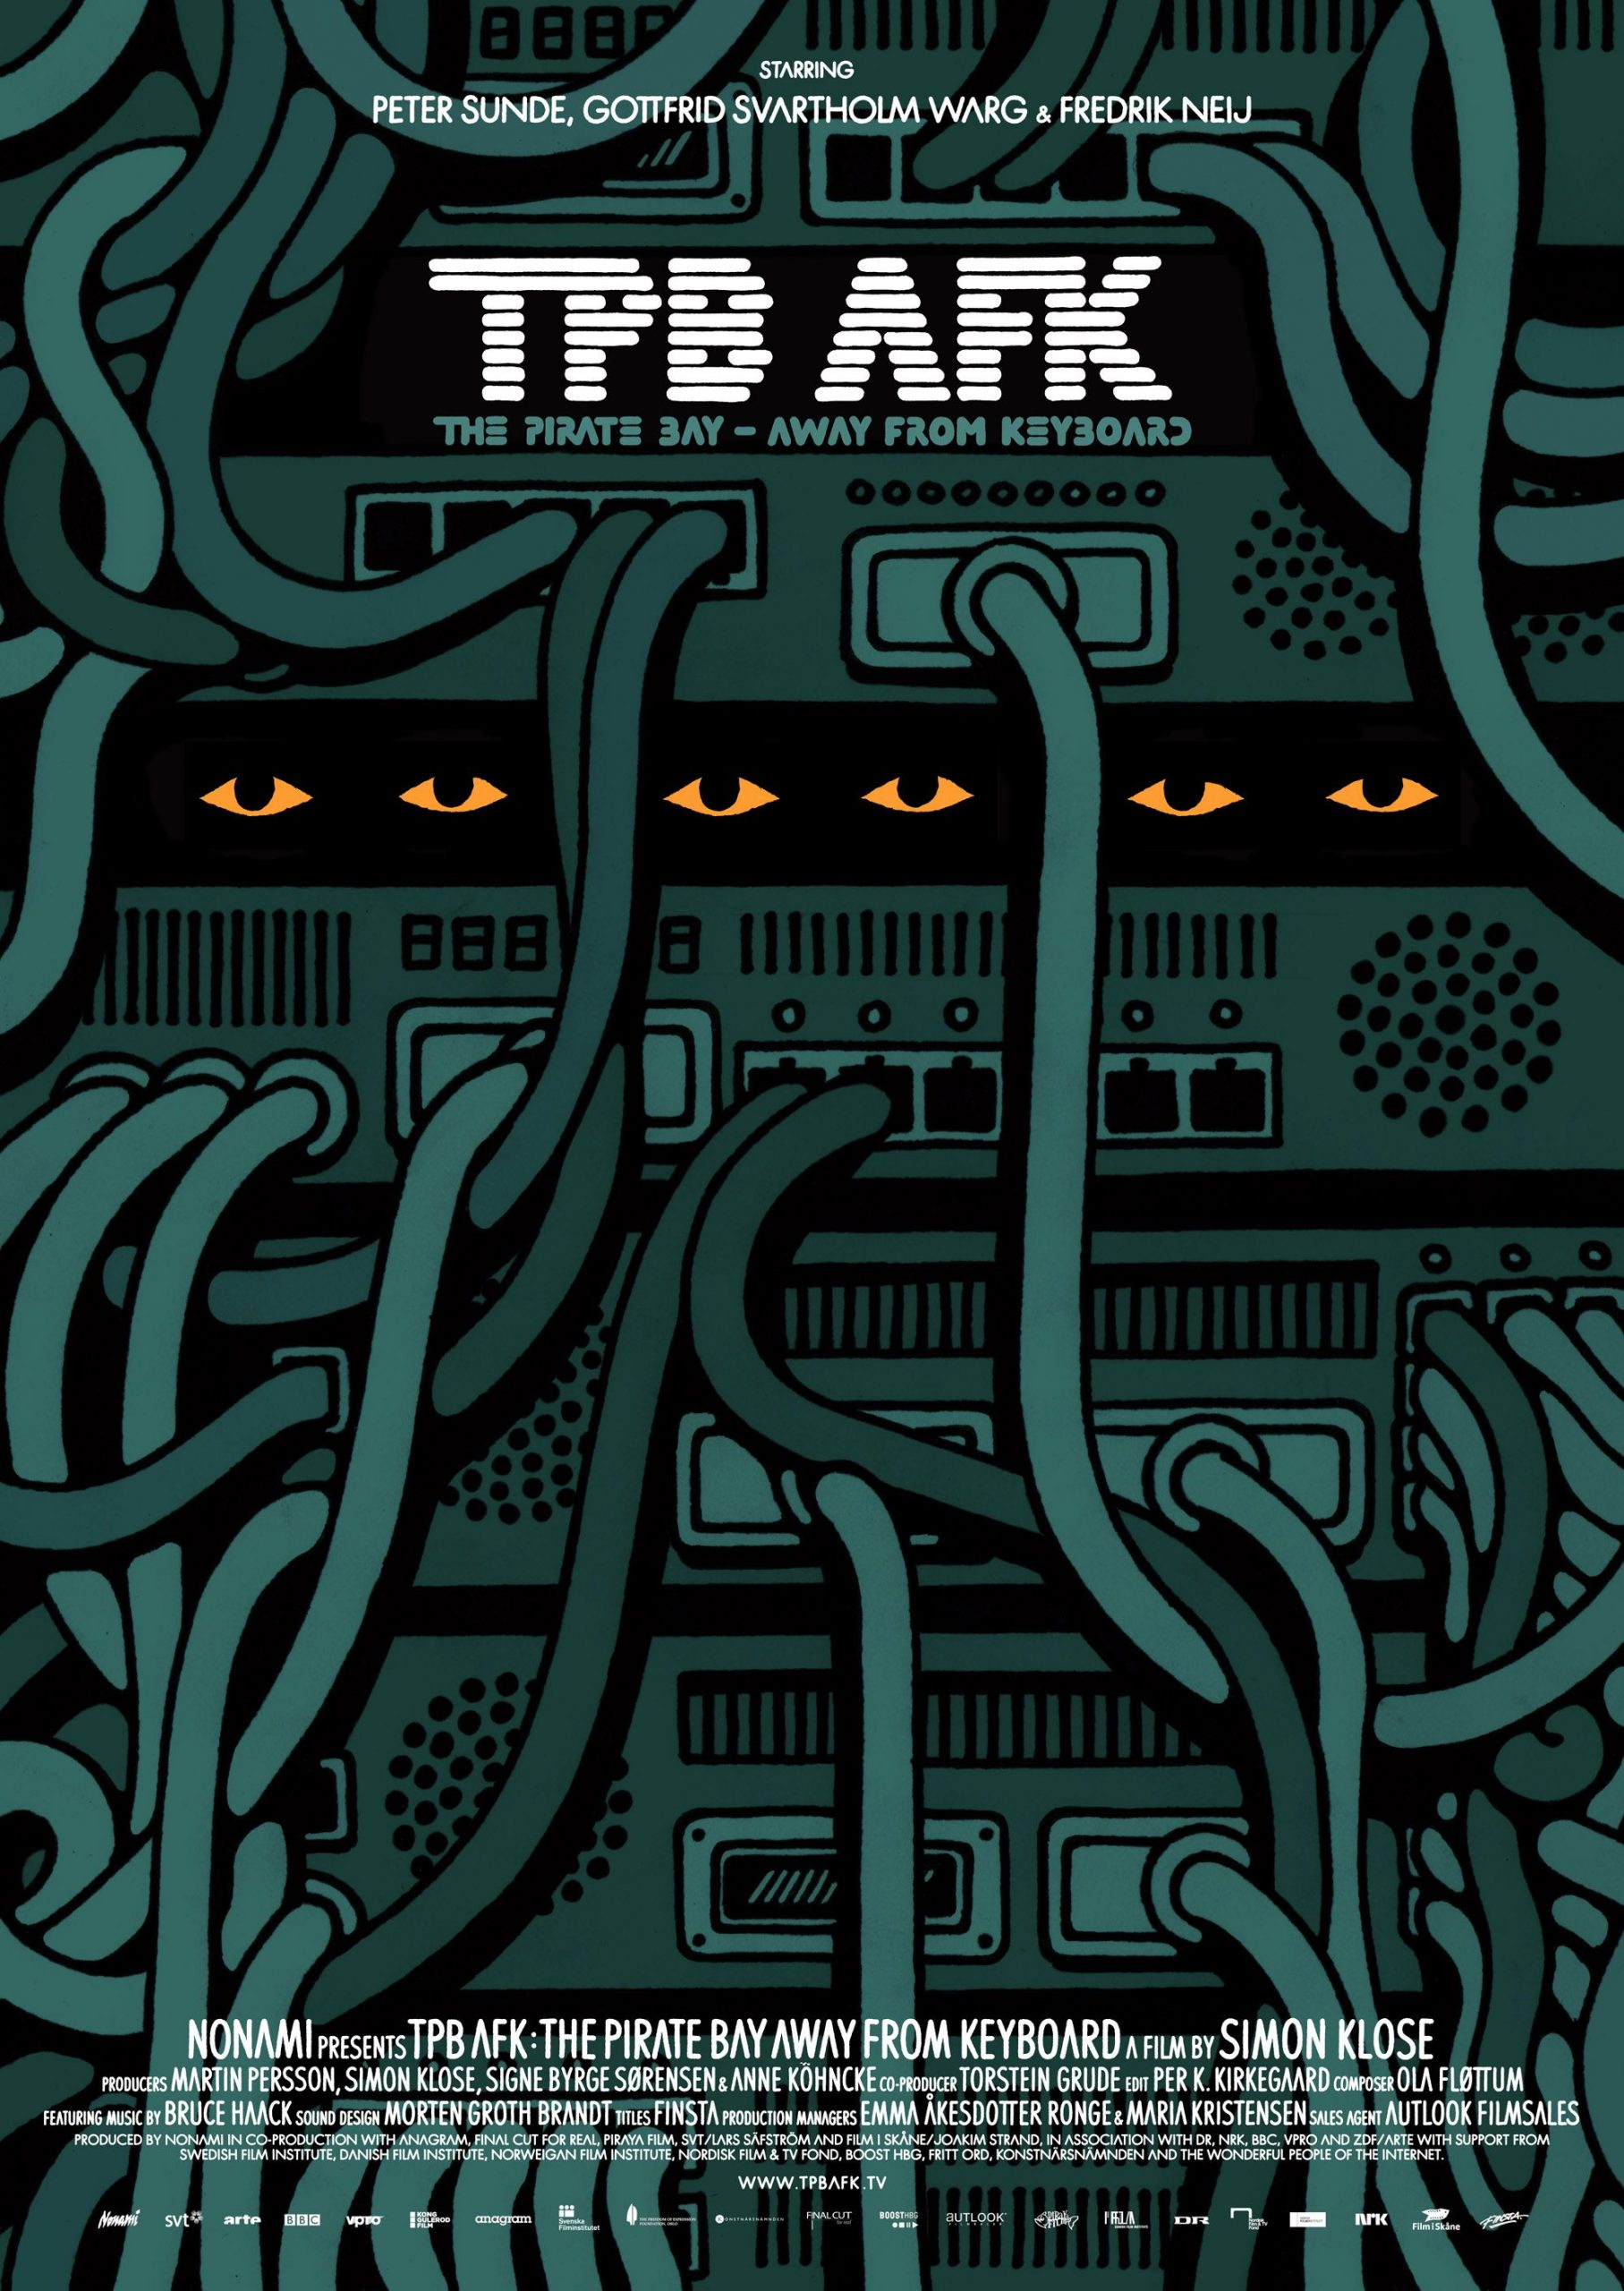 Promotional poster for the film 'TPB AFK: The Pirate Bay Away from Keyboard.' It features an illustration of a server rack with tangled cables, with three pairs of eyes peering out from between the servers.